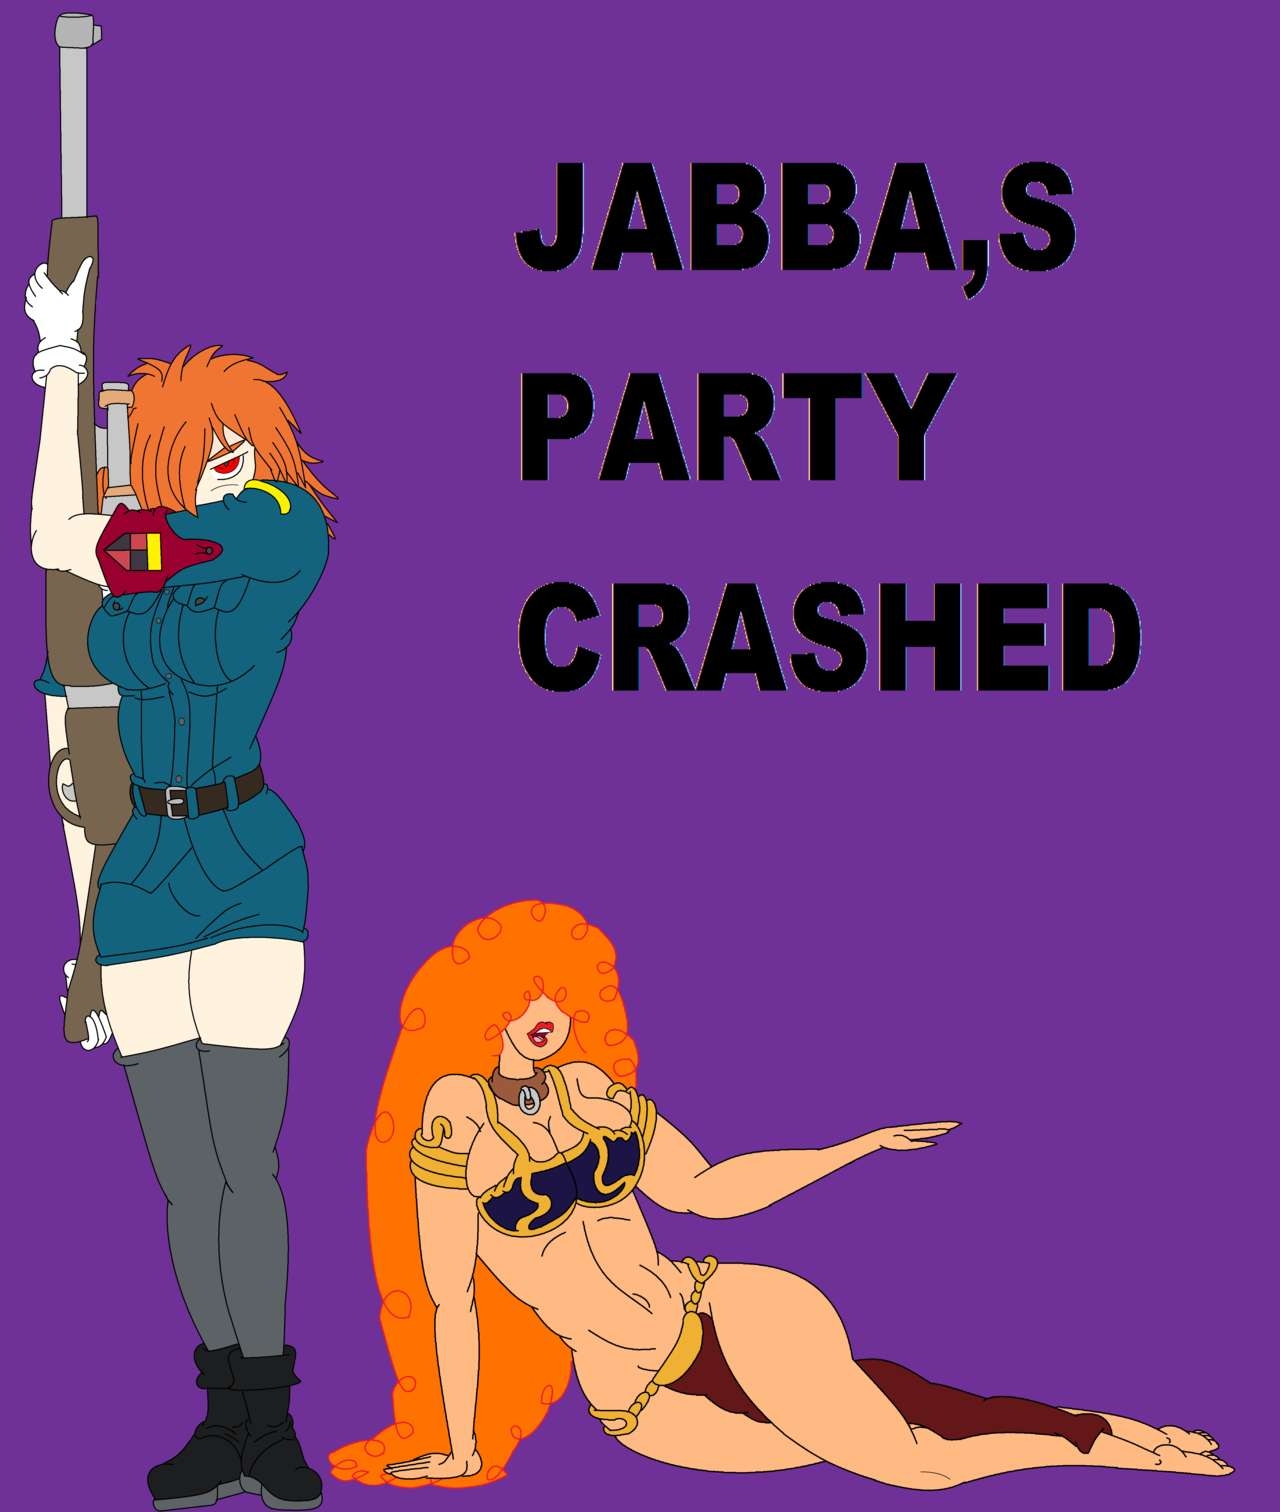 [mechajack] Jabba,s Party Crashed (Star Wars) [Ongoing] 0